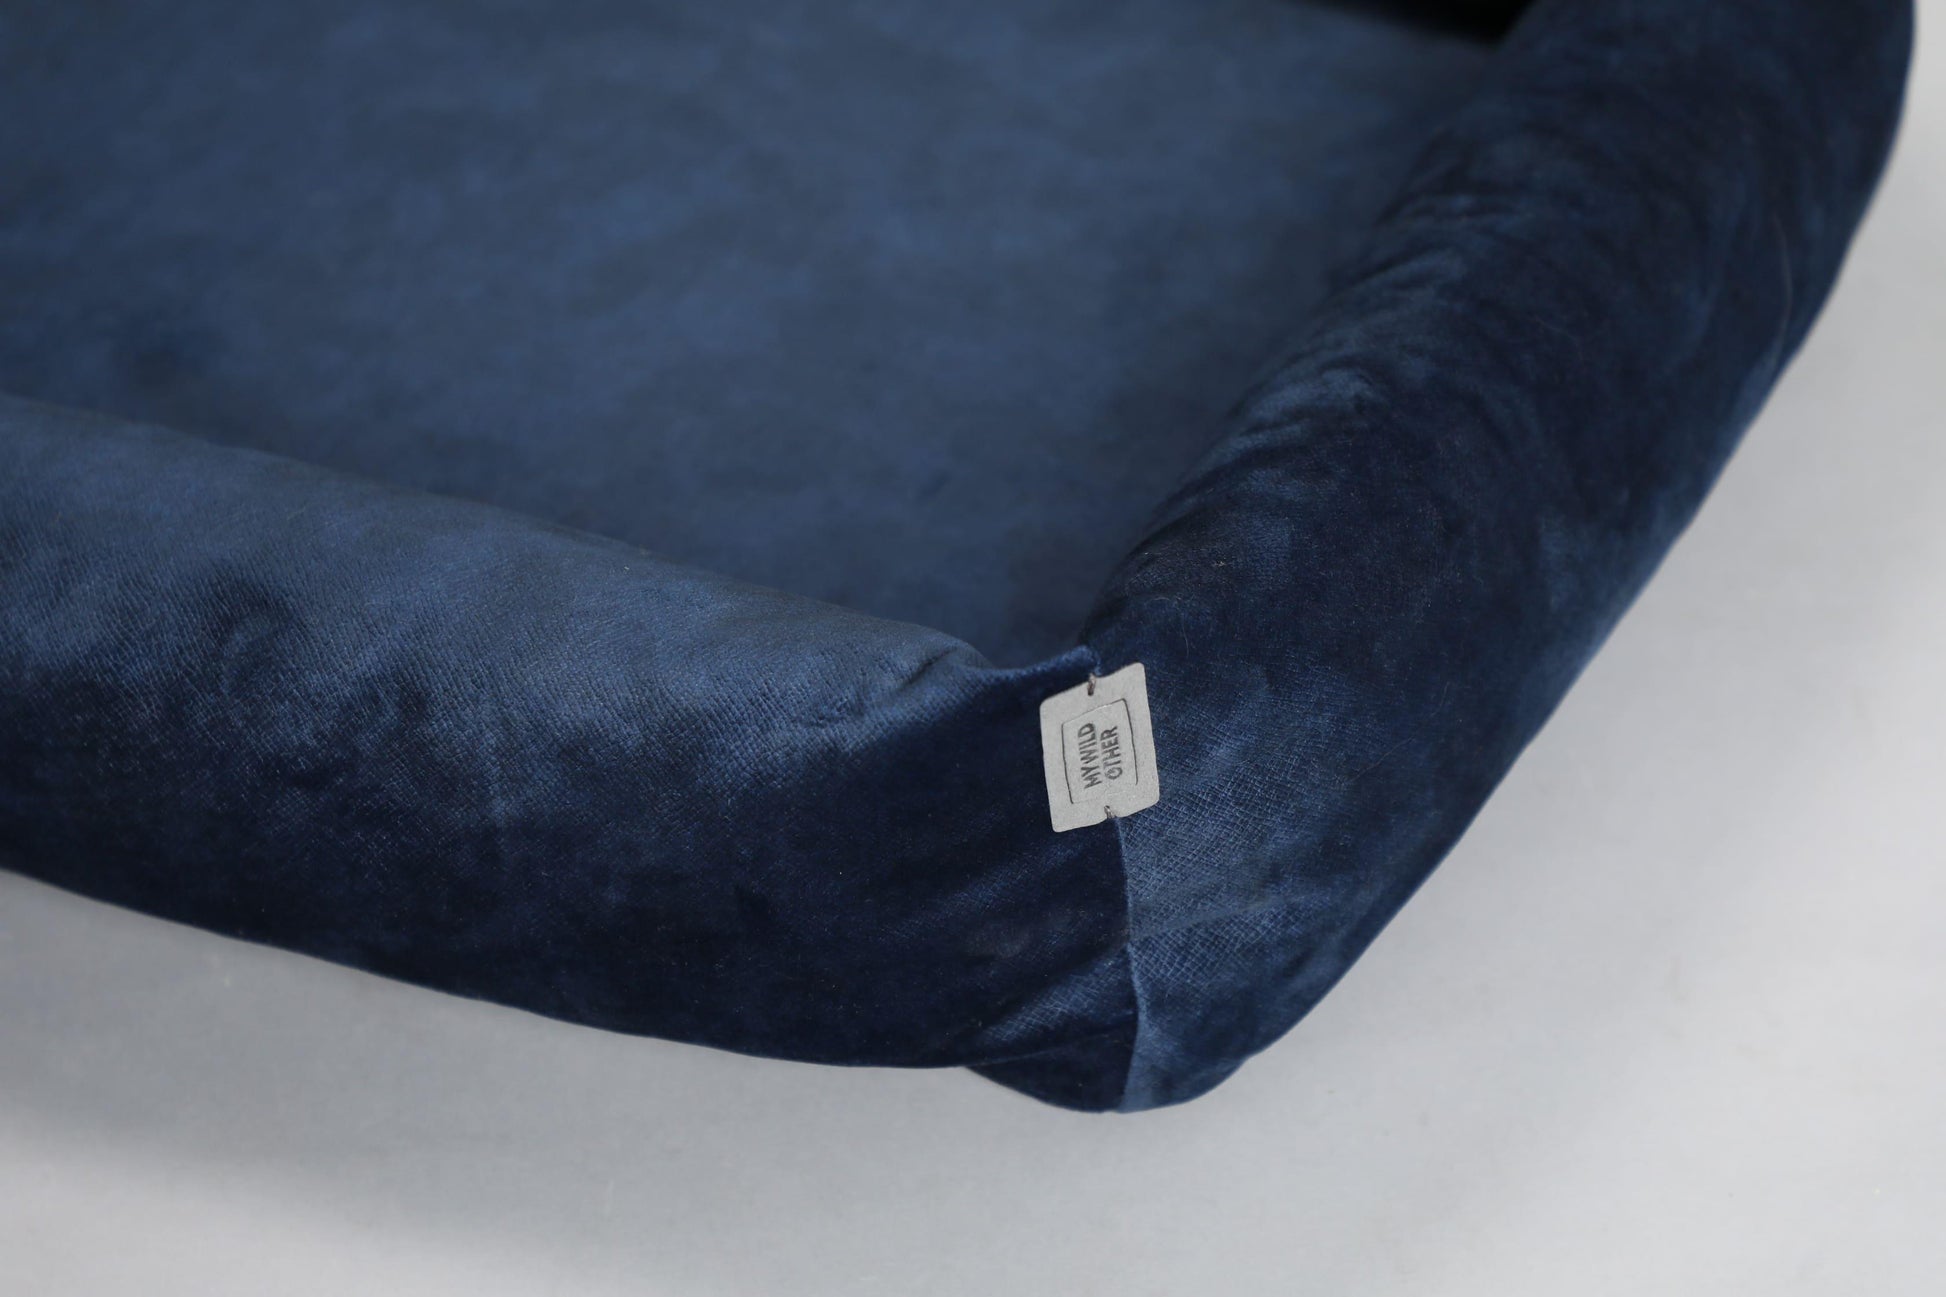 2-sided classic dog bed. ROYAL BLUE - European handmade dog accessories by My Wild Other